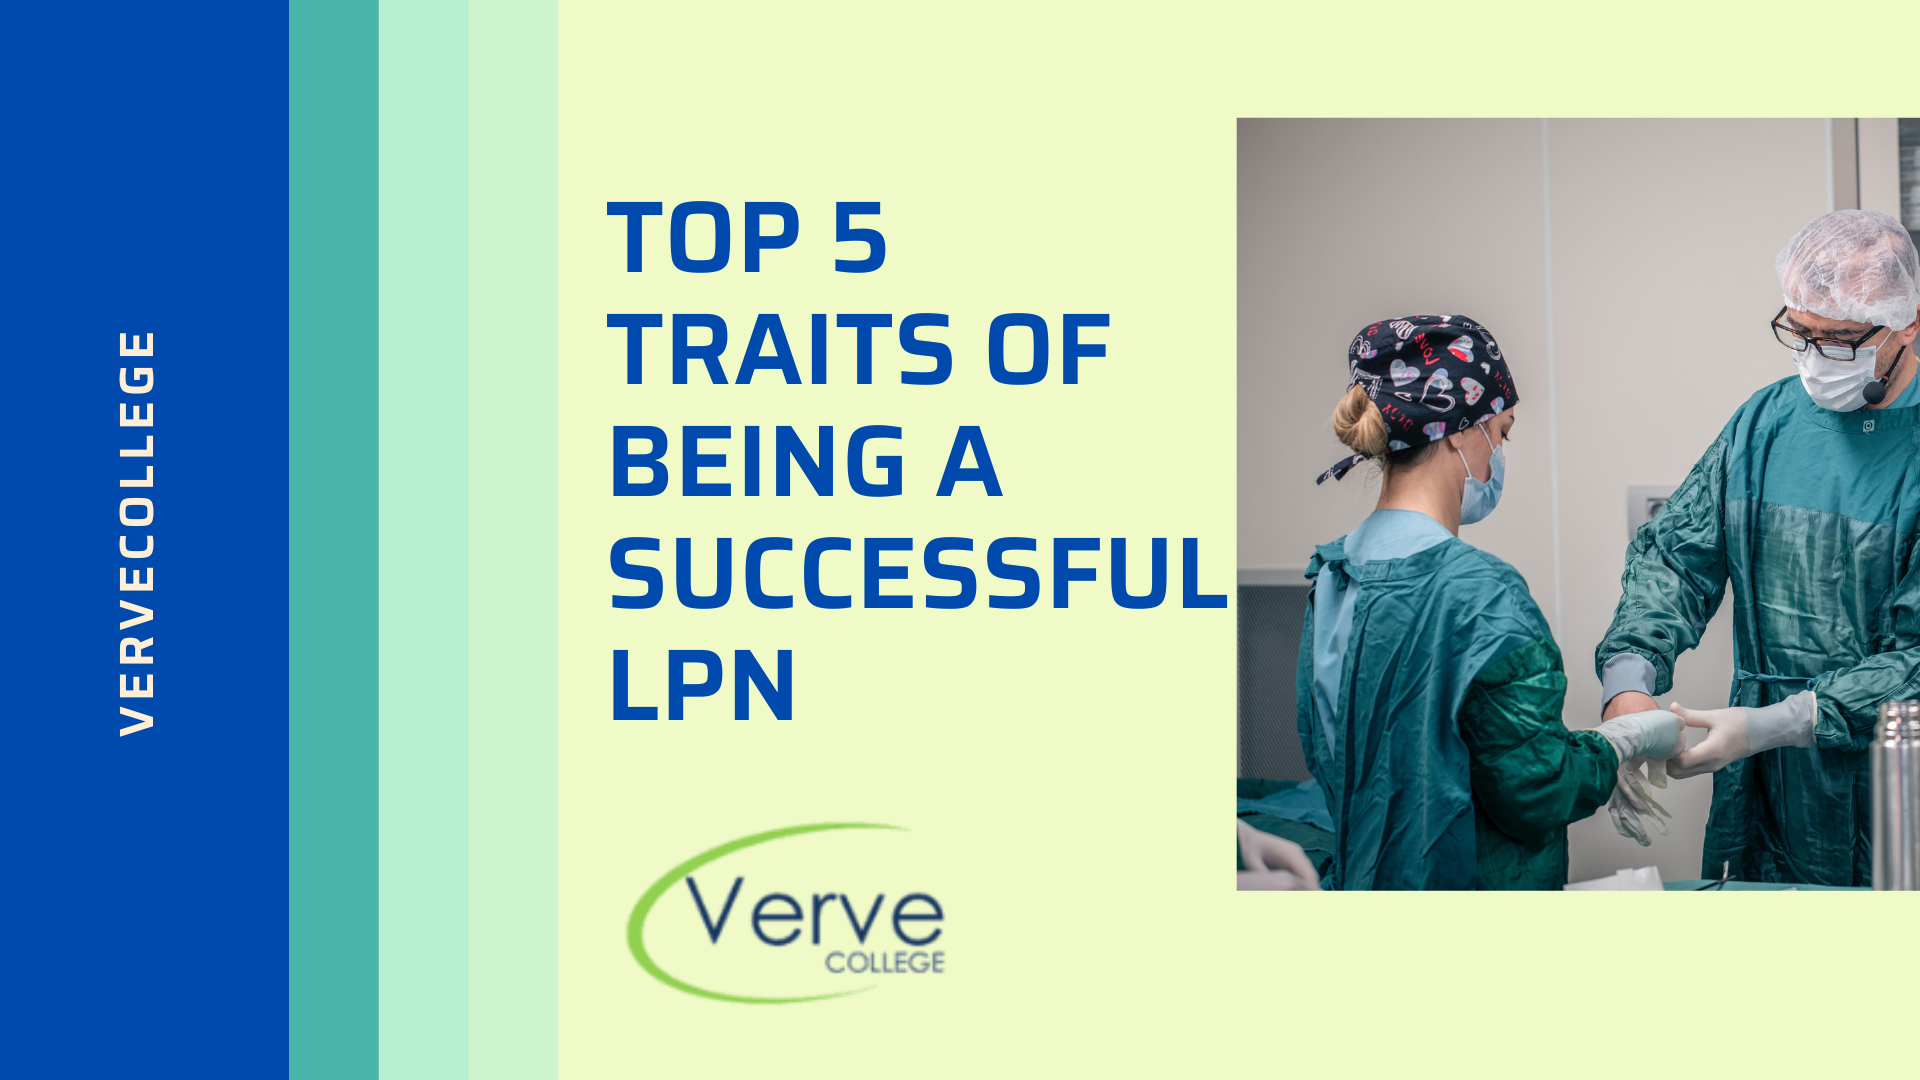 Top 5 Traits of Being a Successful LPN